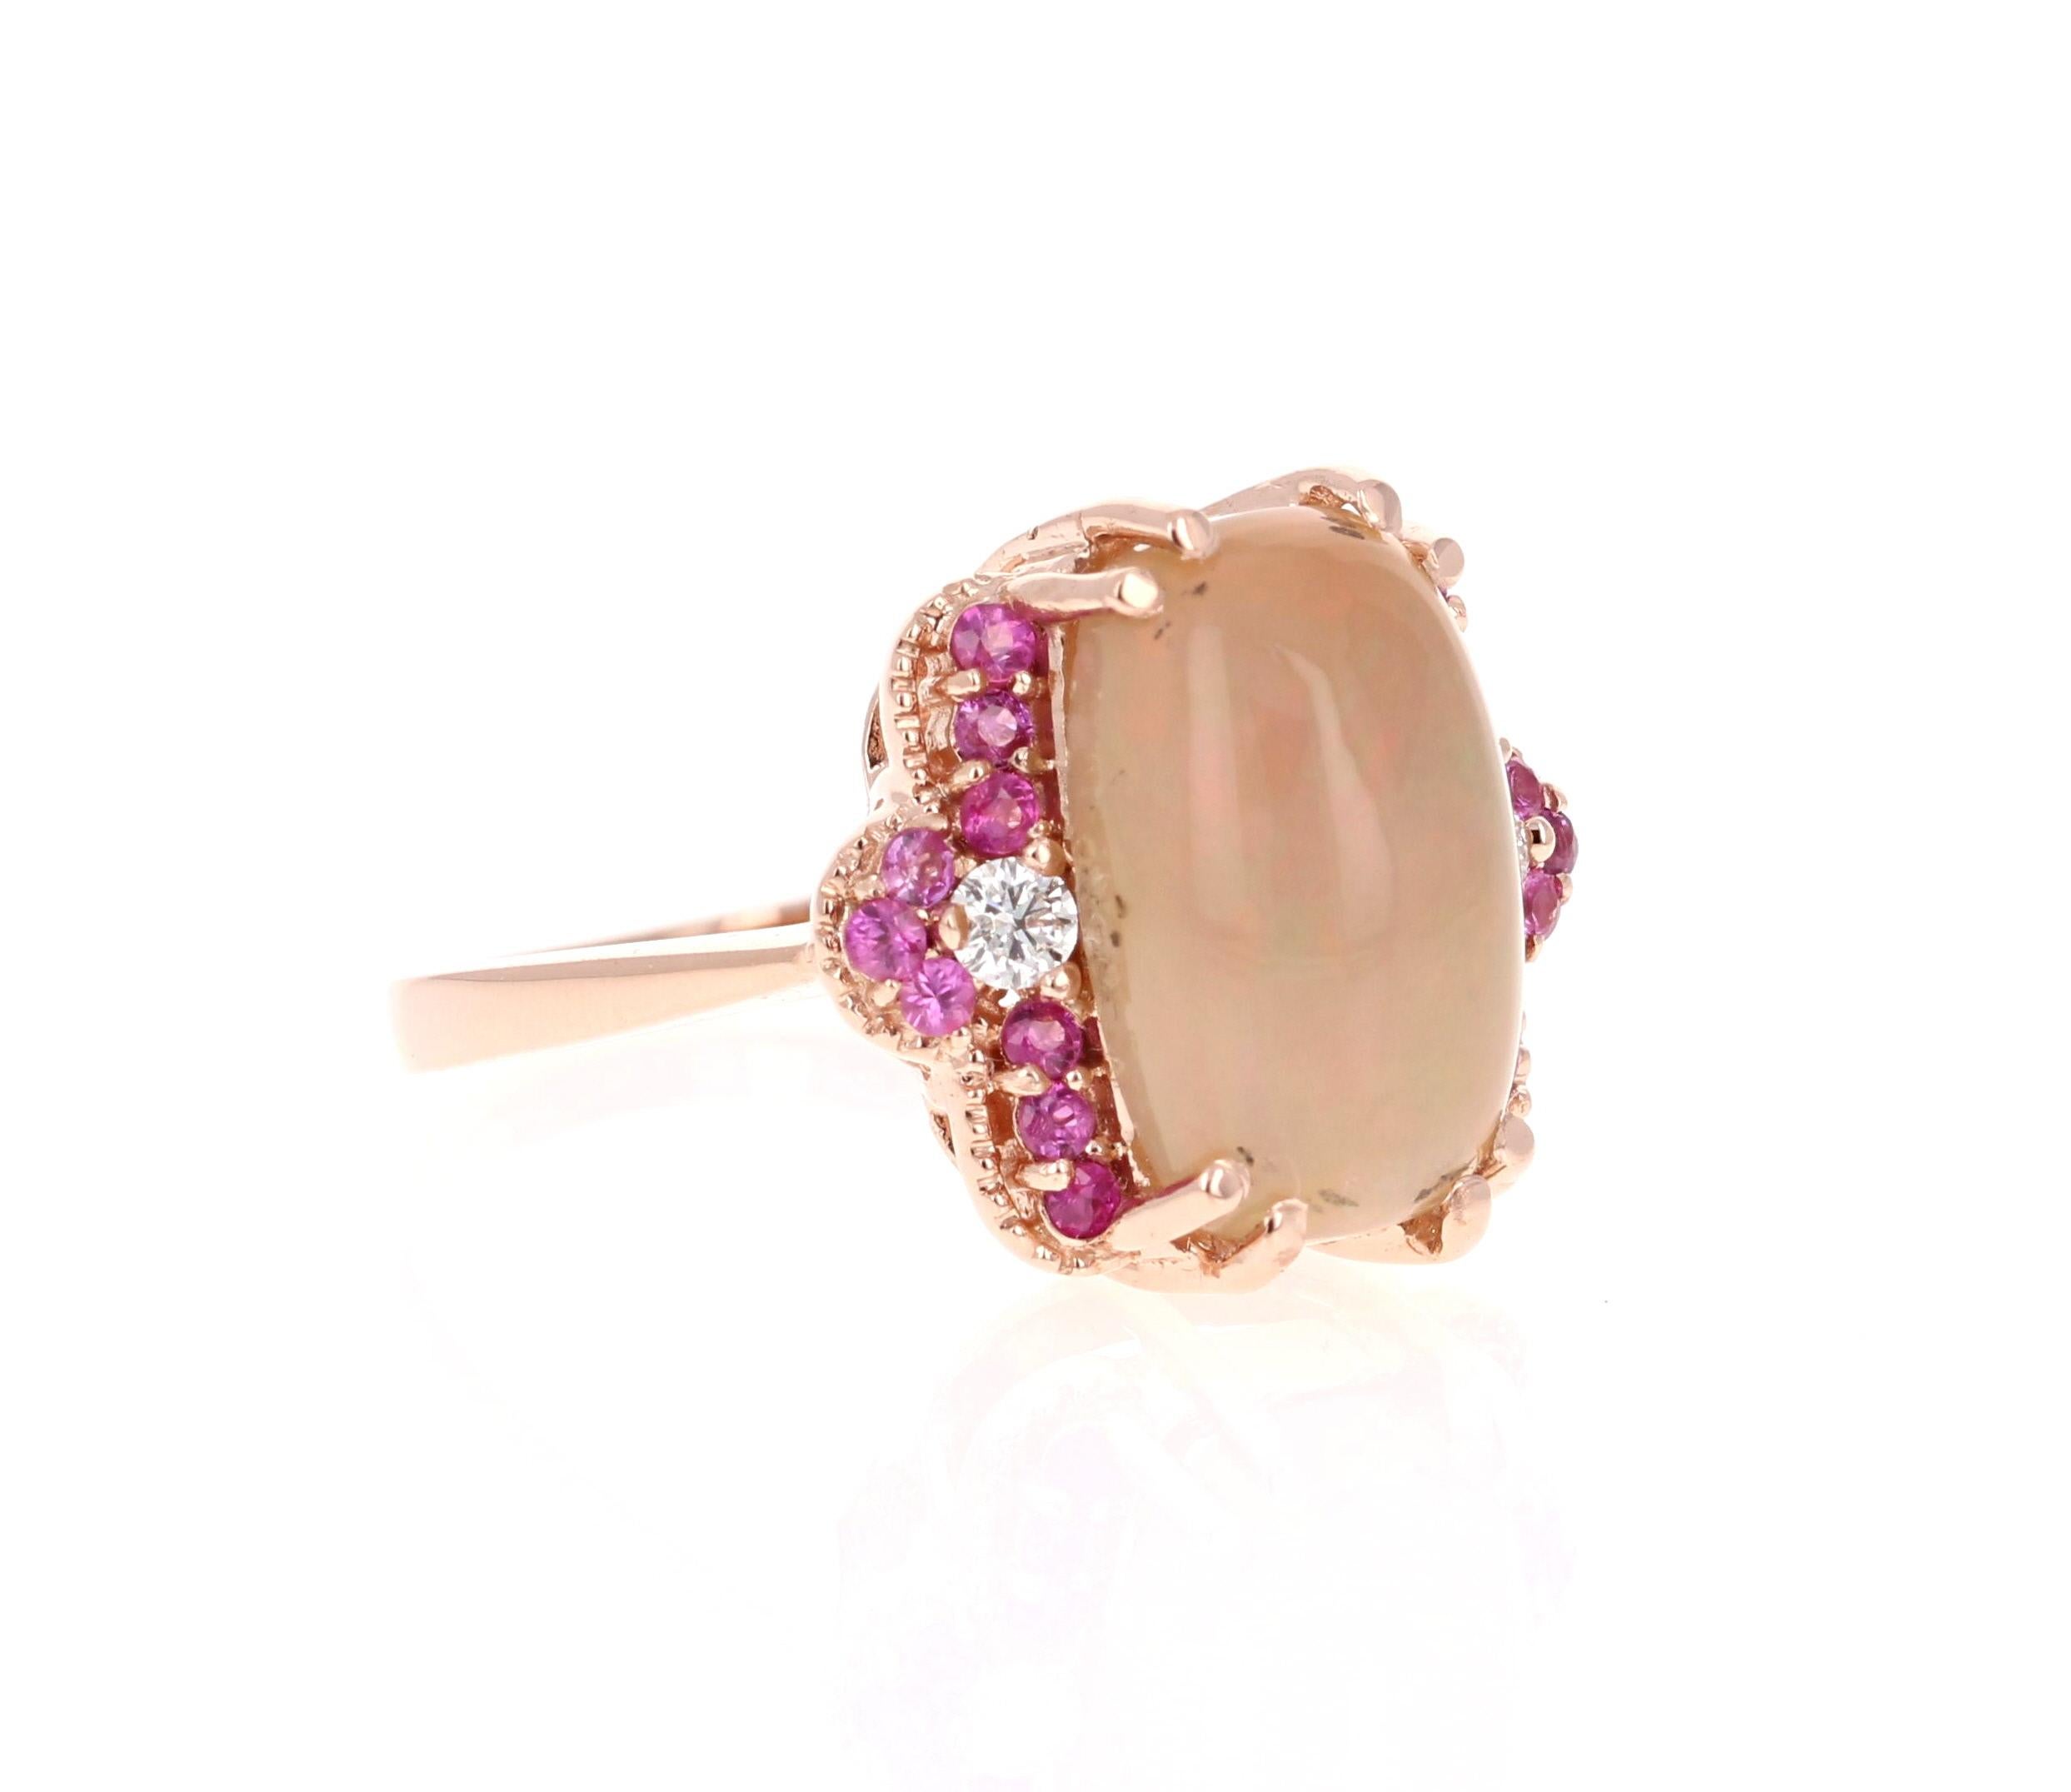 3.62 Carat Oval Cut Opal Diamond Rose Gold Ring

The Oval Cut Opal in this ring weighs 3.19 carats and the measurements of the Opal are 9 mm x 14 mm. The Opal is surrounded by 2 Round Cut Diamonds that weigh 0.12 carats and also 18 Pink Sapphires